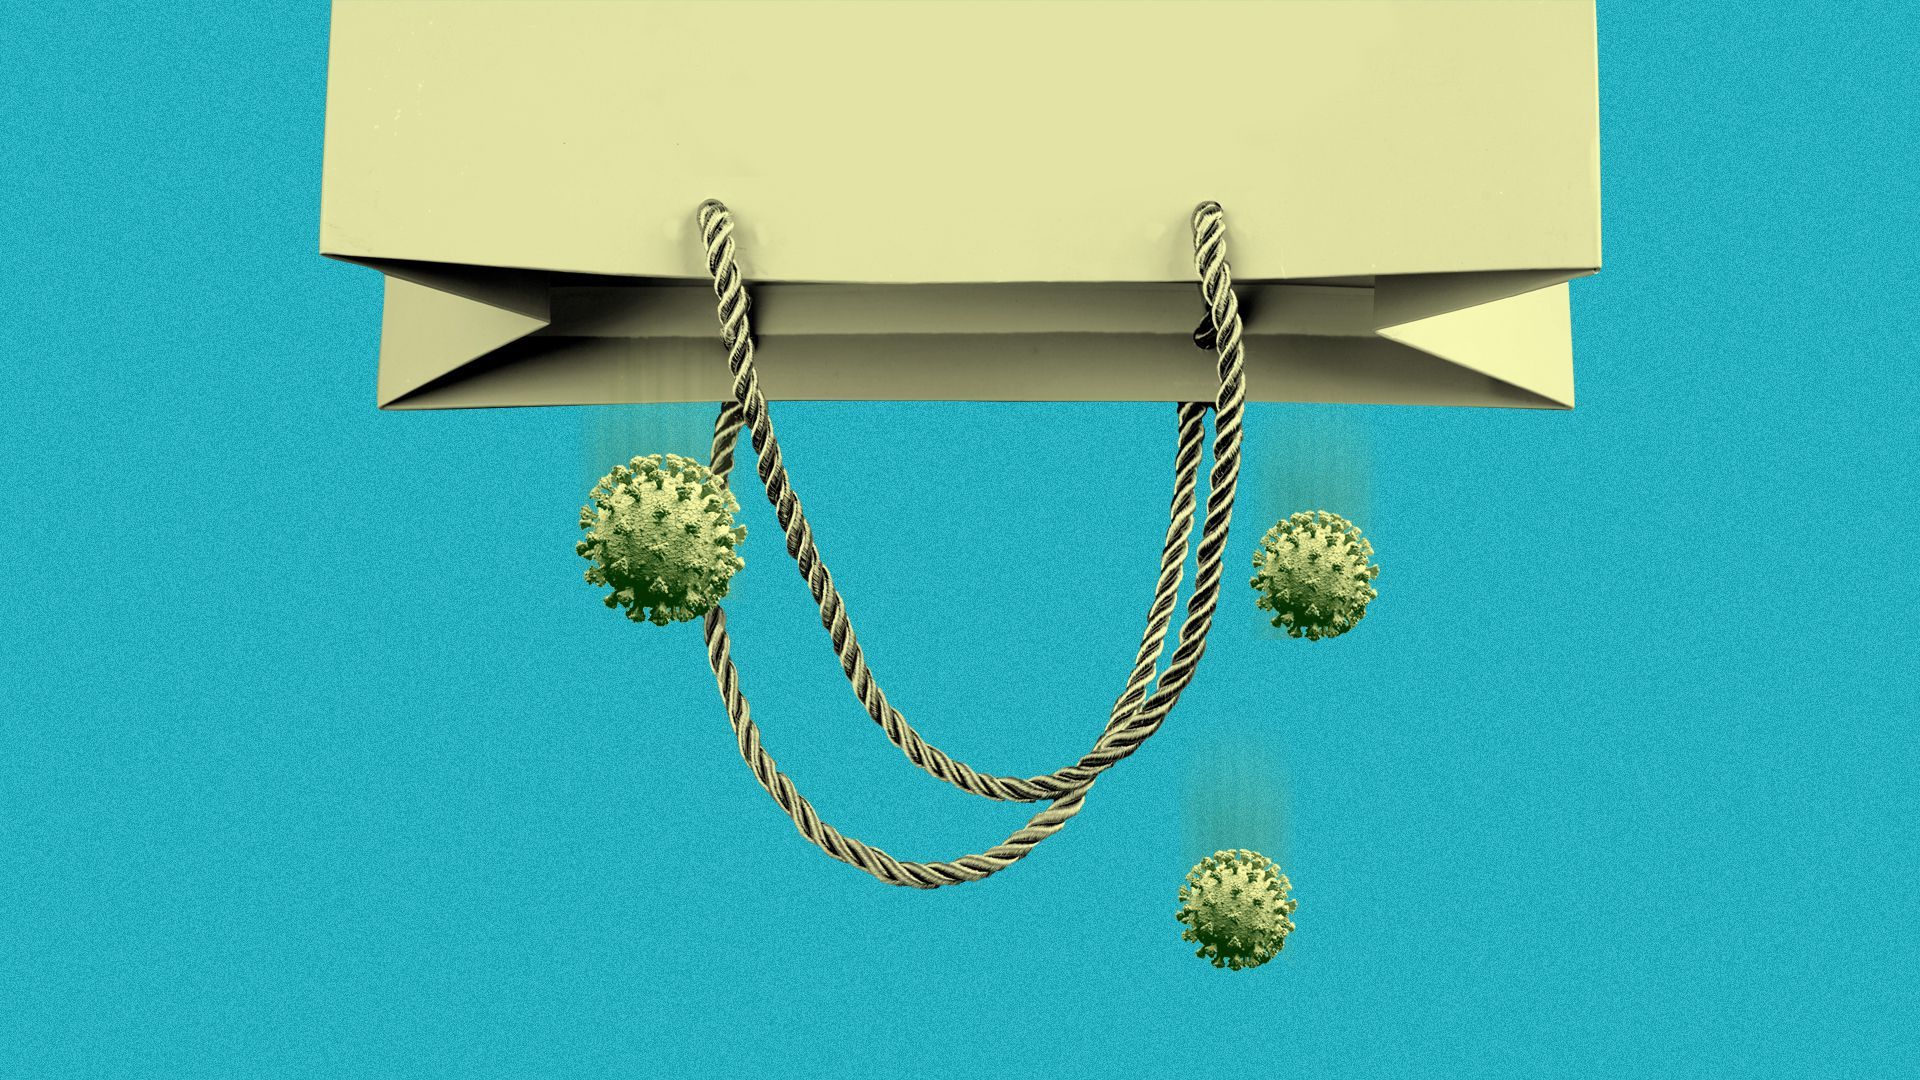 Illustration of an upside down shopping bag with coronavirus particles falling out.